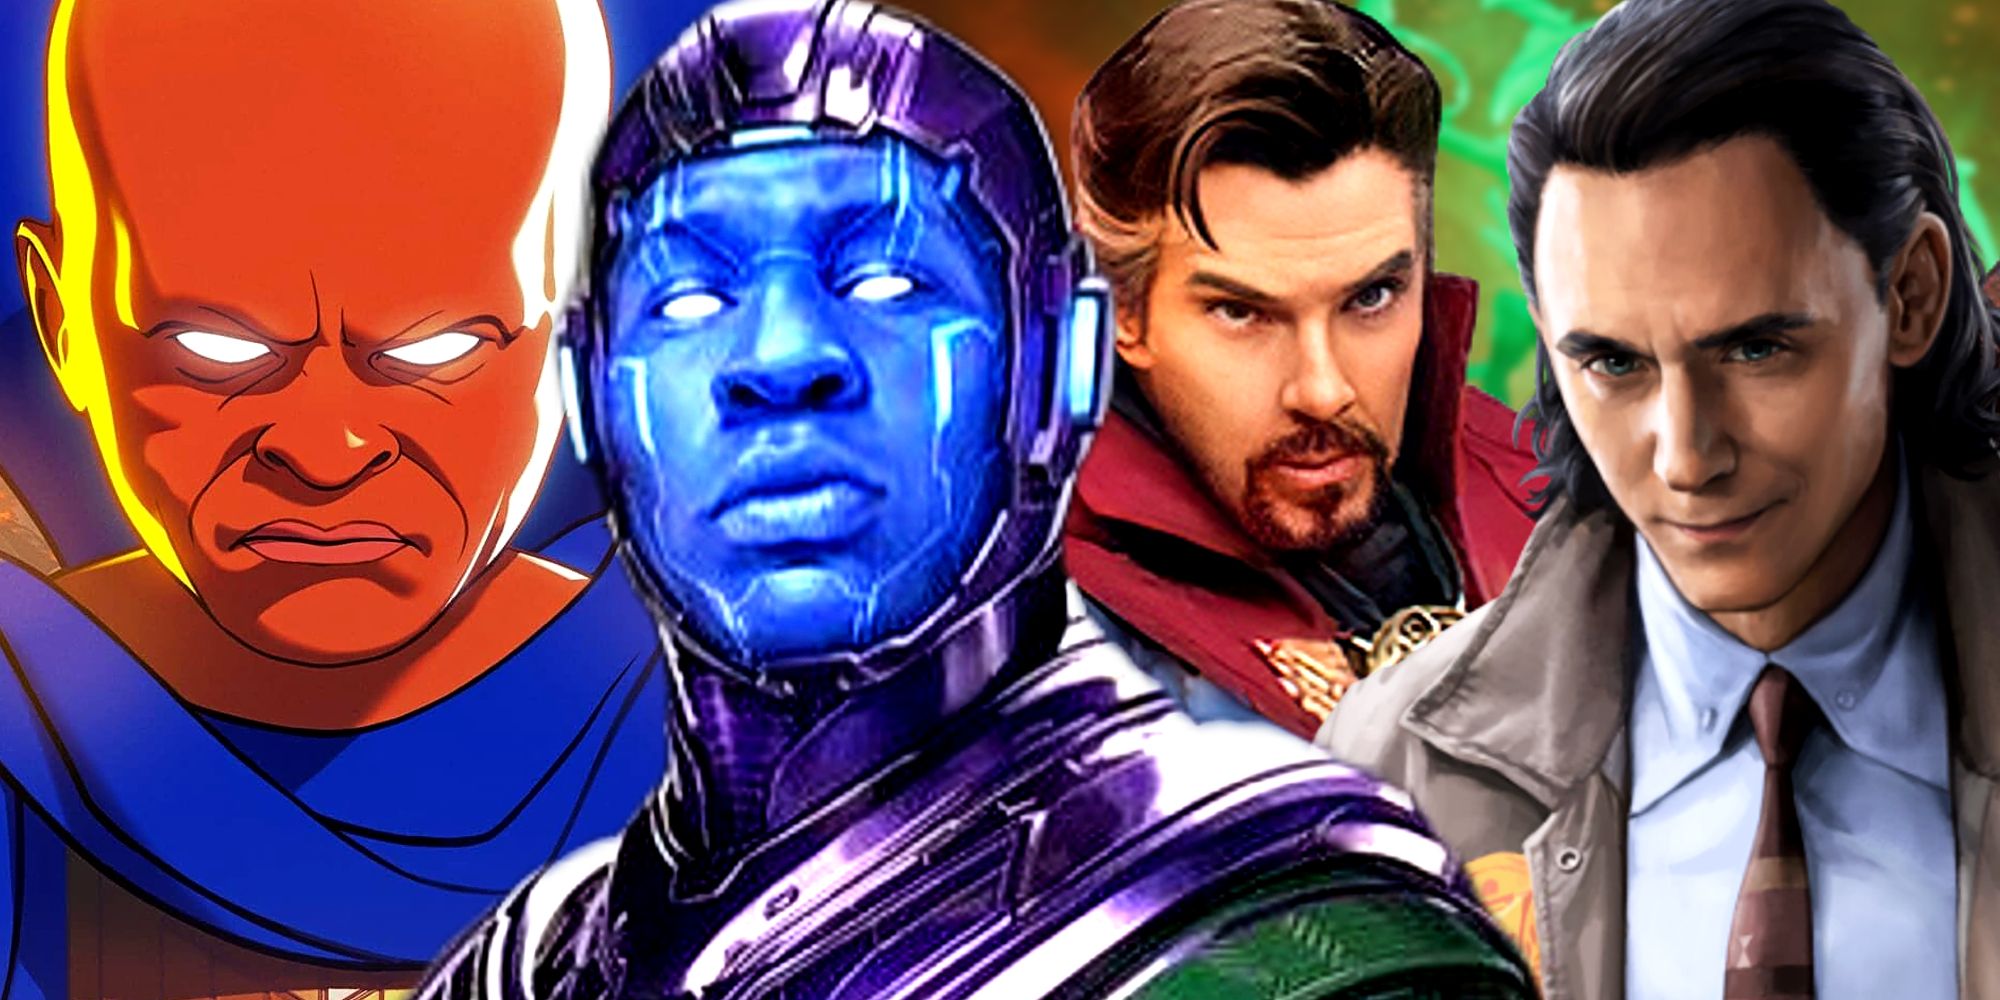 Kang the Conqueror, Doctor Strange, Loki, and the Watcher in the MCU